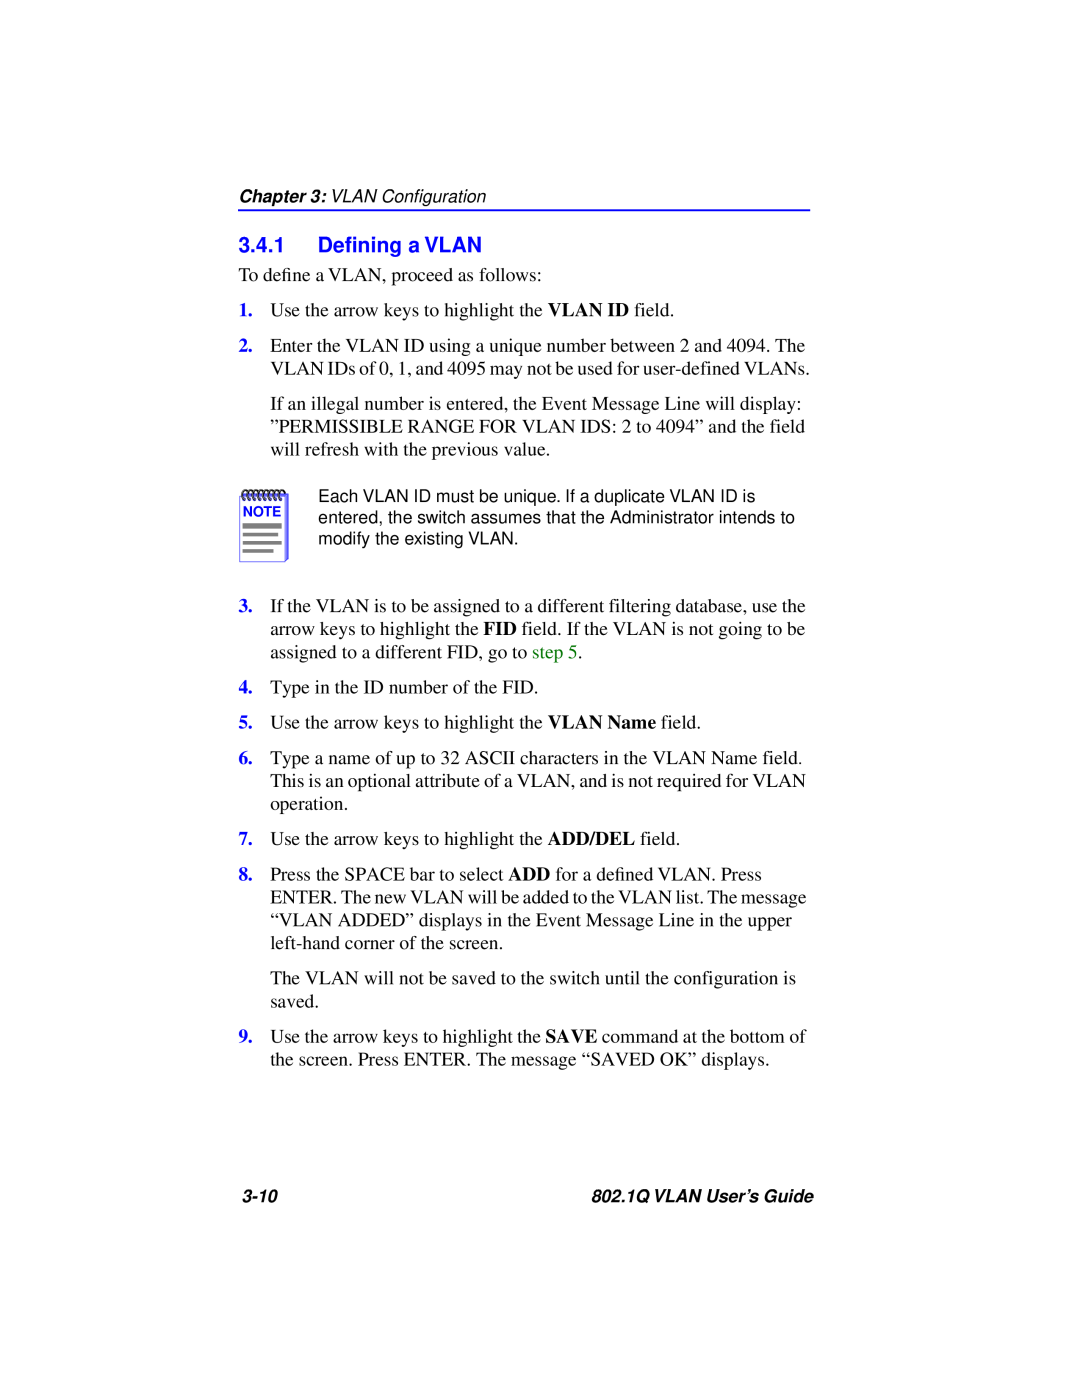 Cabletron Systems 802.1Q manual 3.4.1 Deﬁning a VLAN 